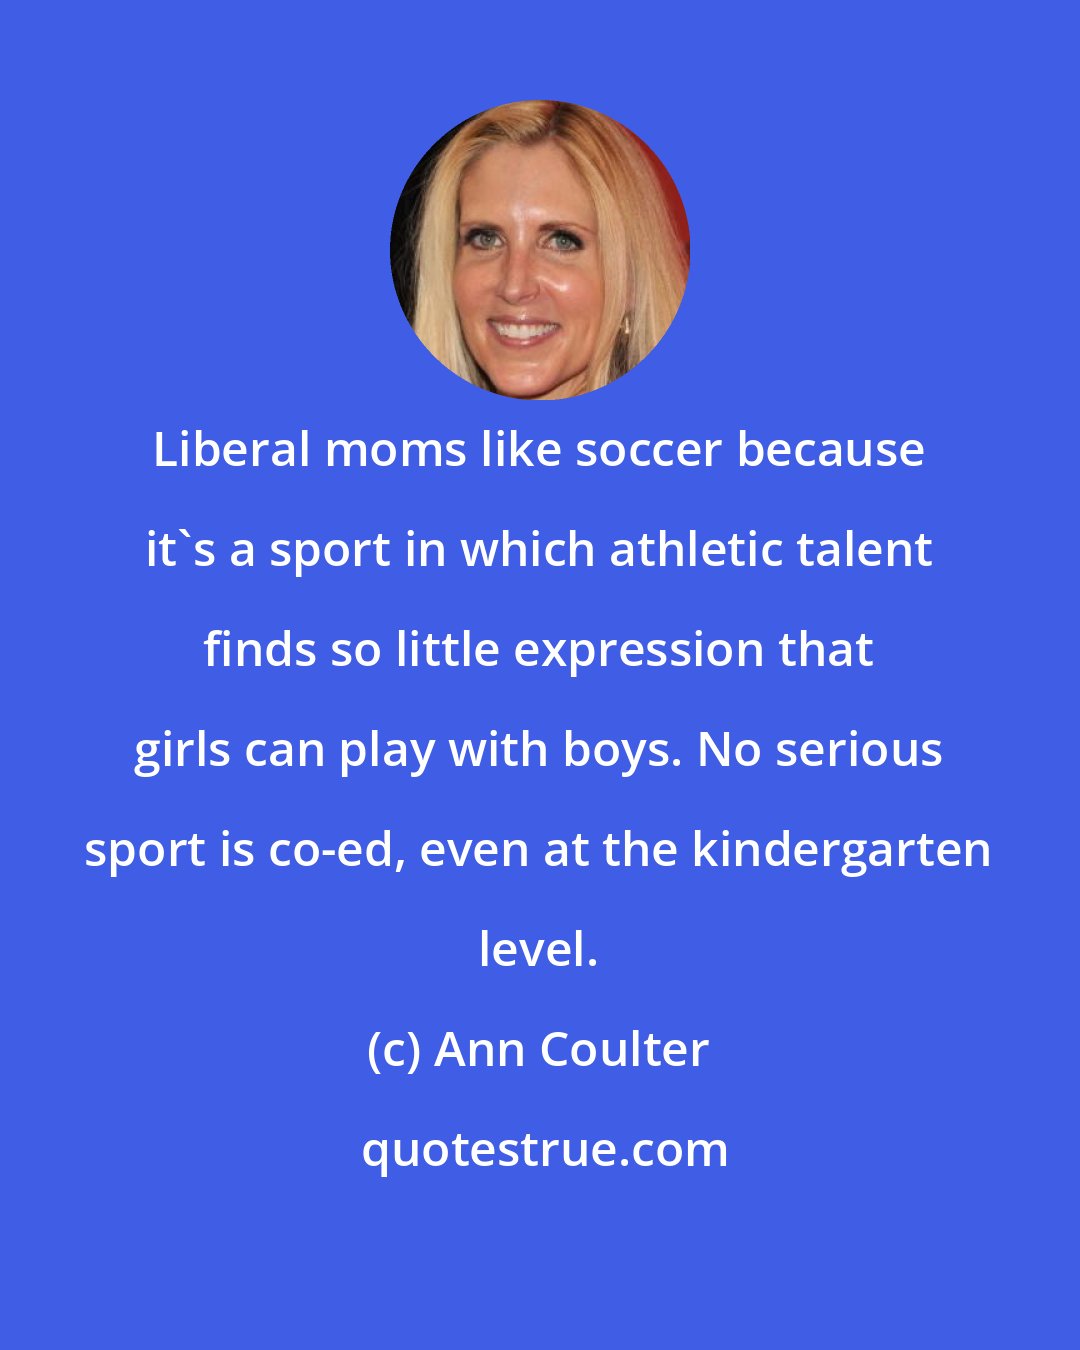 Ann Coulter: Liberal moms like soccer because it's a sport in which athletic talent finds so little expression that girls can play with boys. No serious sport is co-ed, even at the kindergarten level.